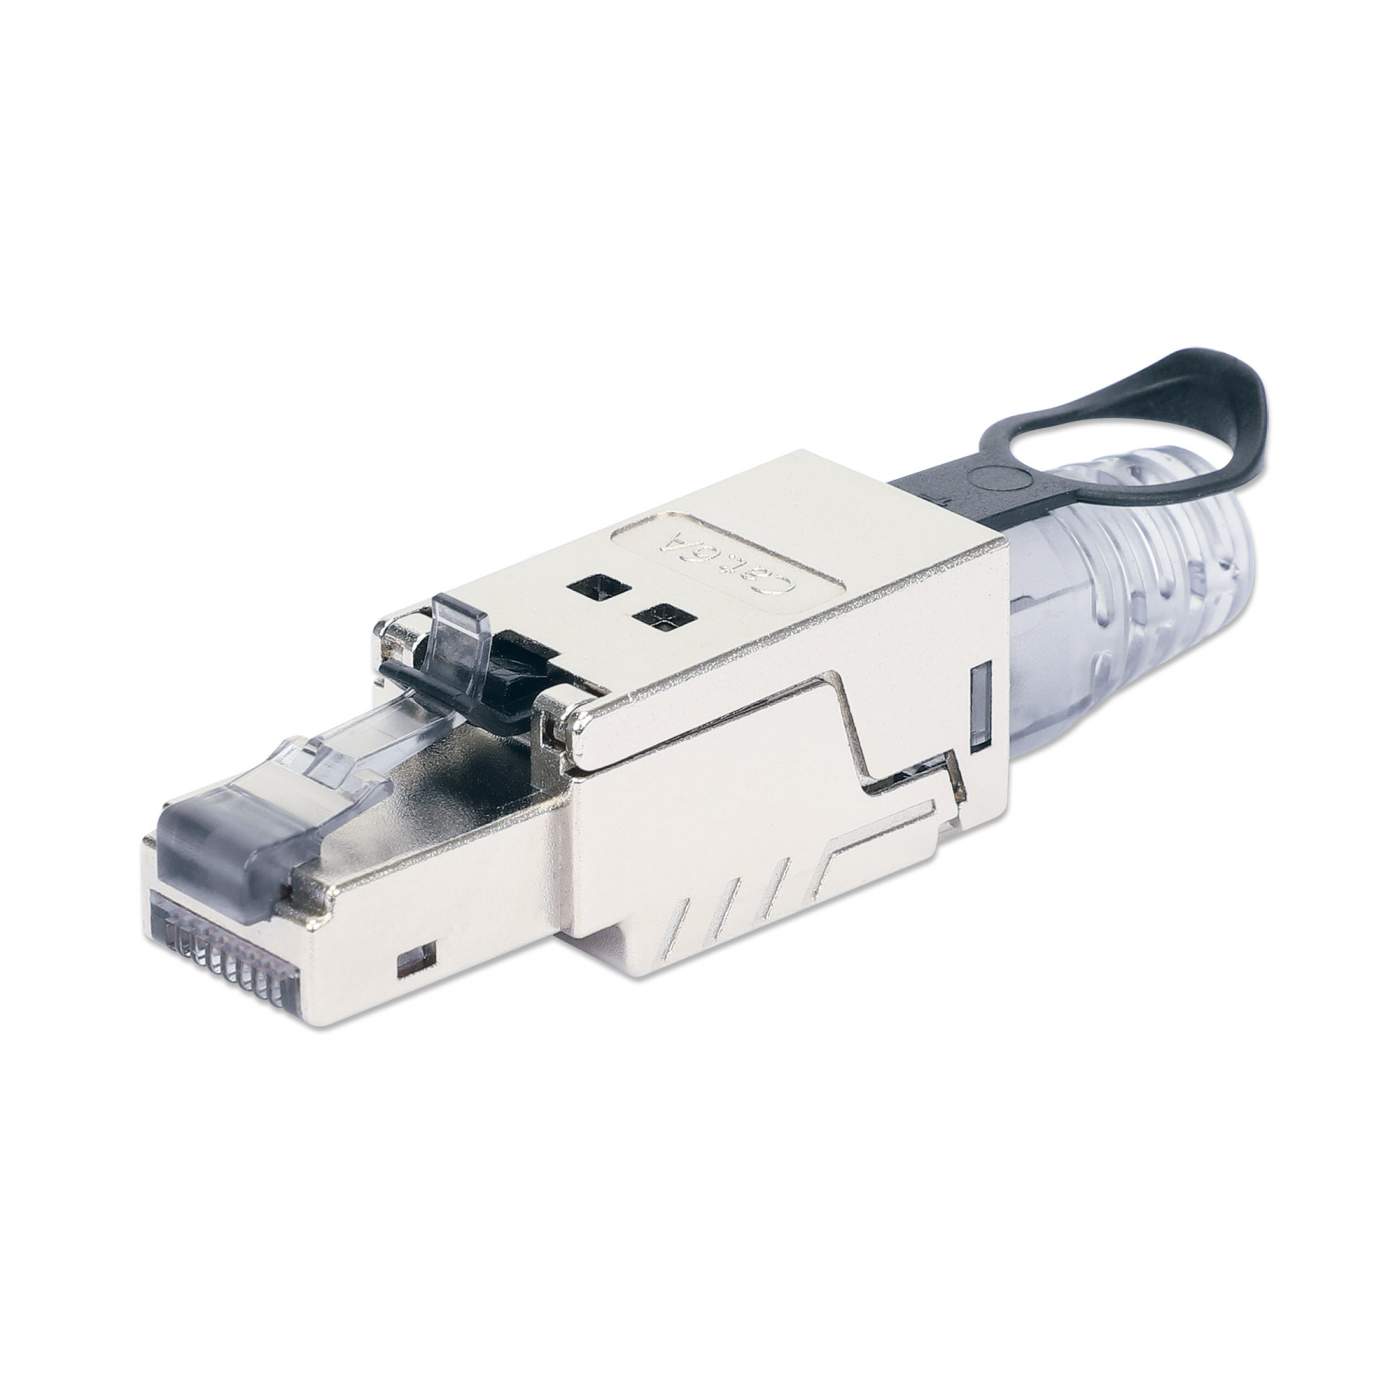 Cat6a 10G Shielded Toolless RJ45 Modular Field Termination Plug with Pull-ring Release Image 1